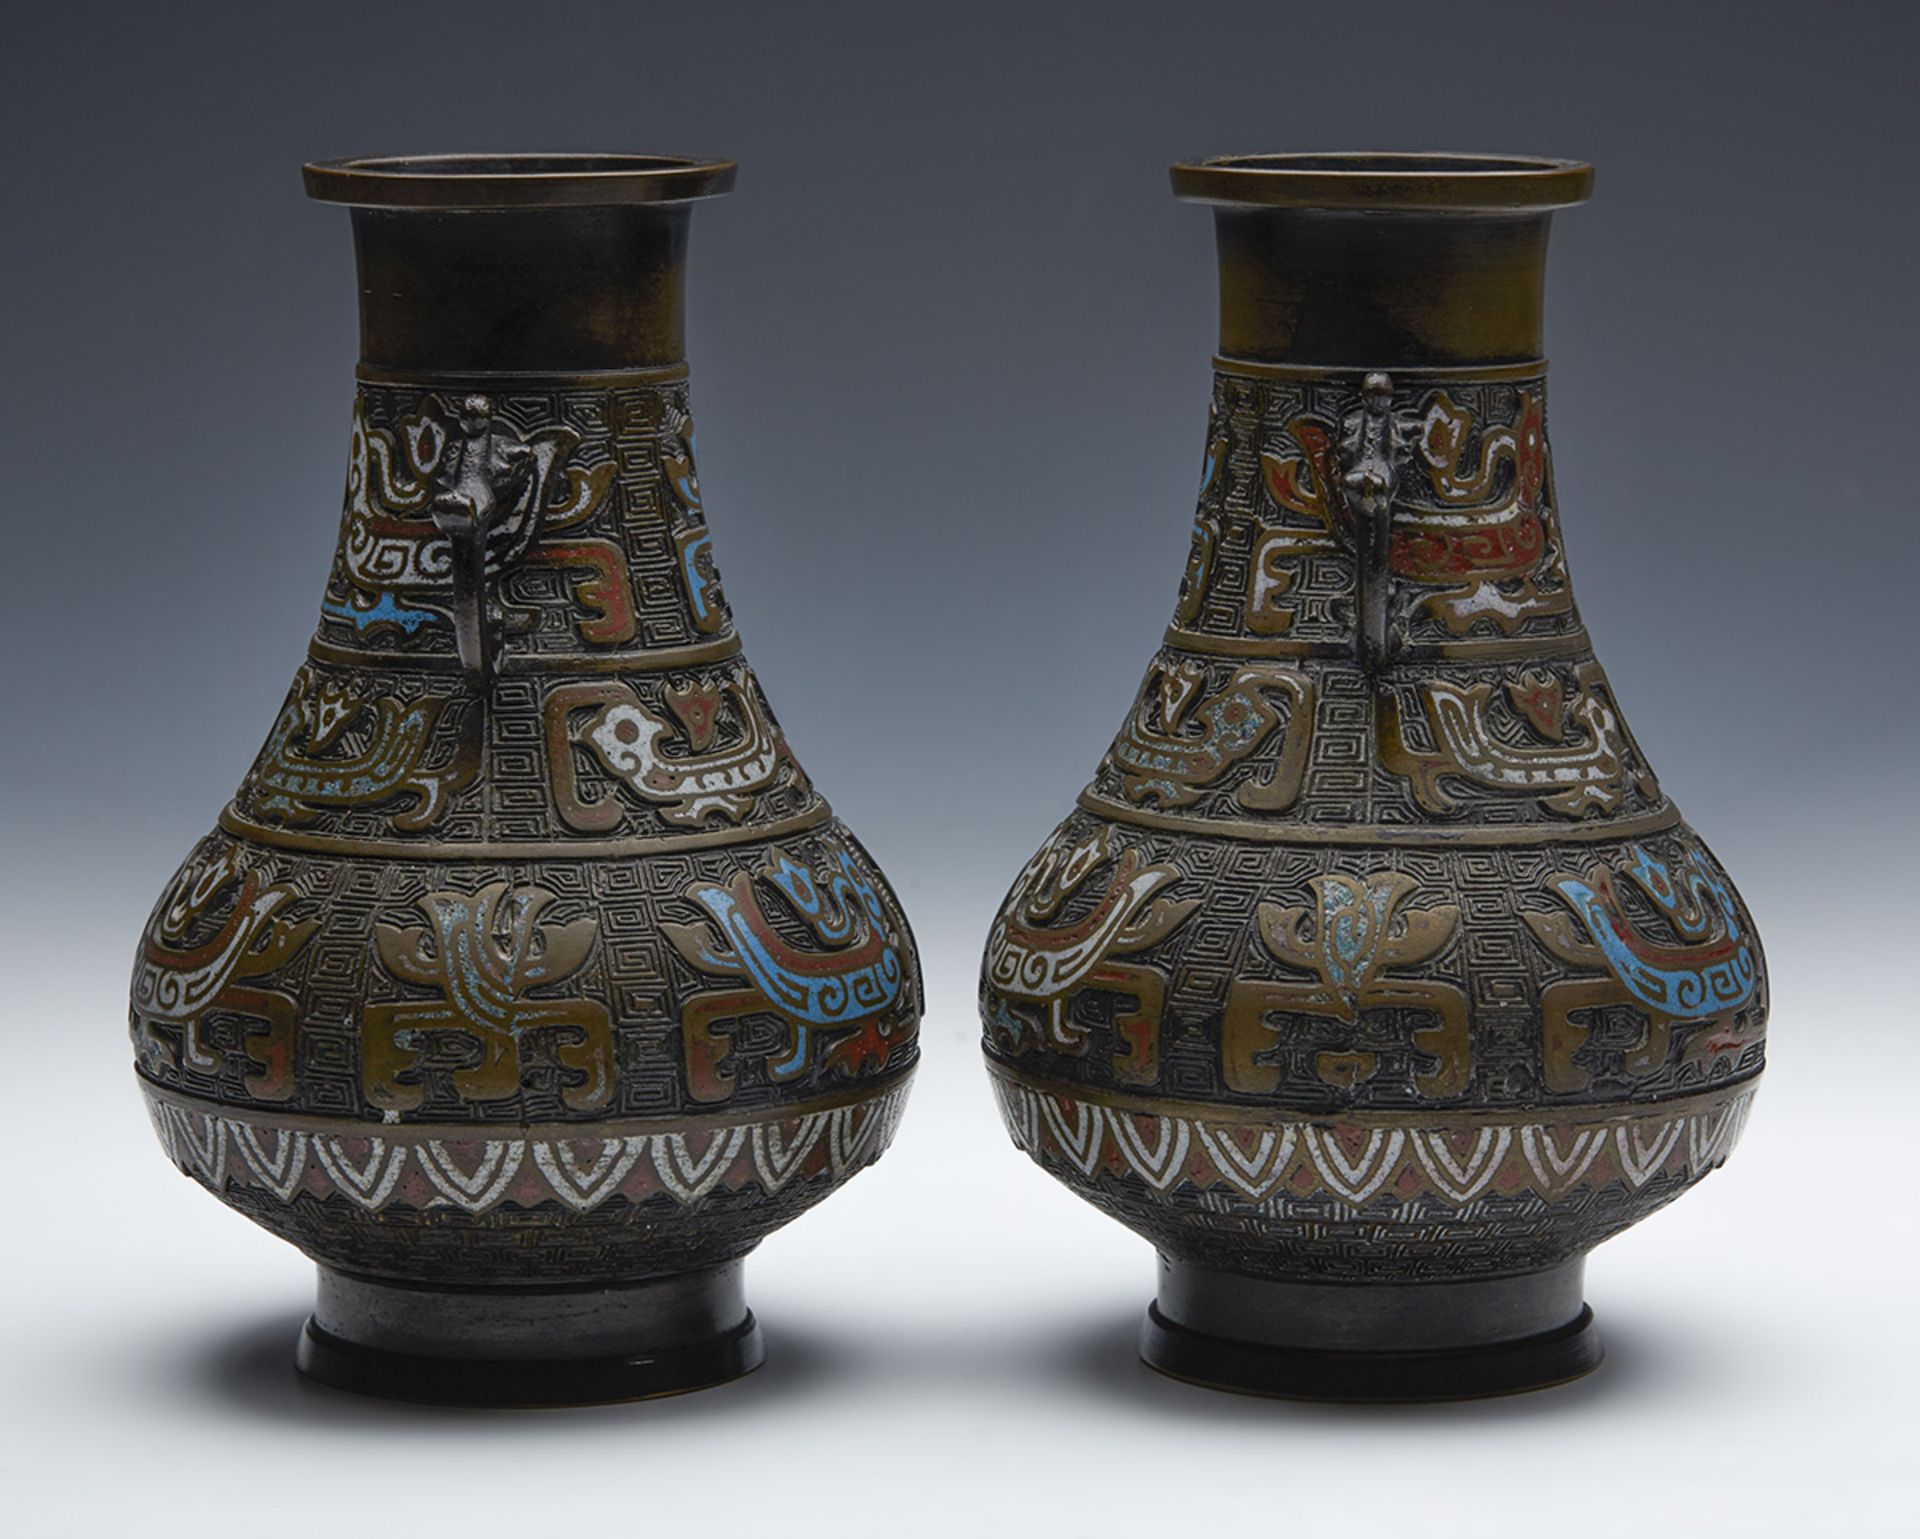 PAIR ANTIQUE CHINESE CHAMPLEVE ENAMEL BRONZE VASES 19TH C. - Image 3 of 8